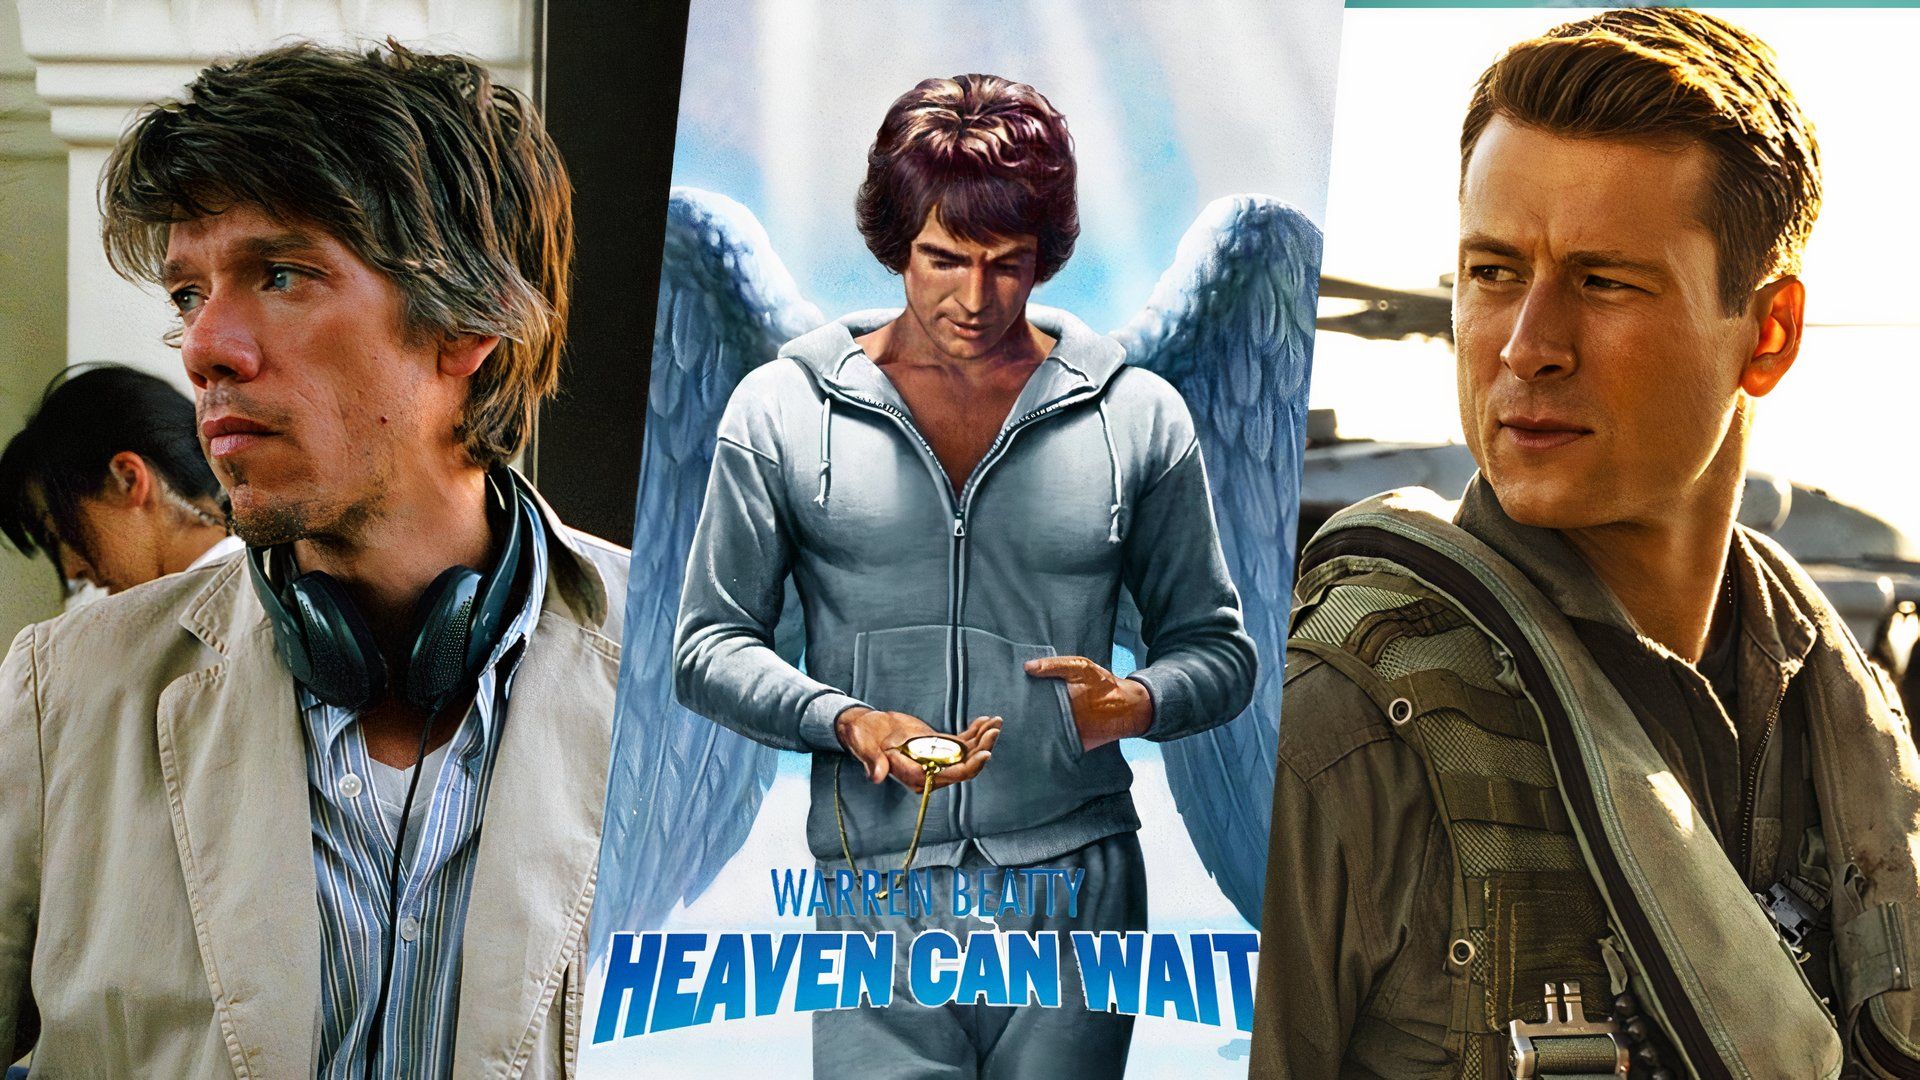 Stephen Gaghan behind the scenes next to image from Heaven Can Wait and Glen Powell in Top Gun: Maverick